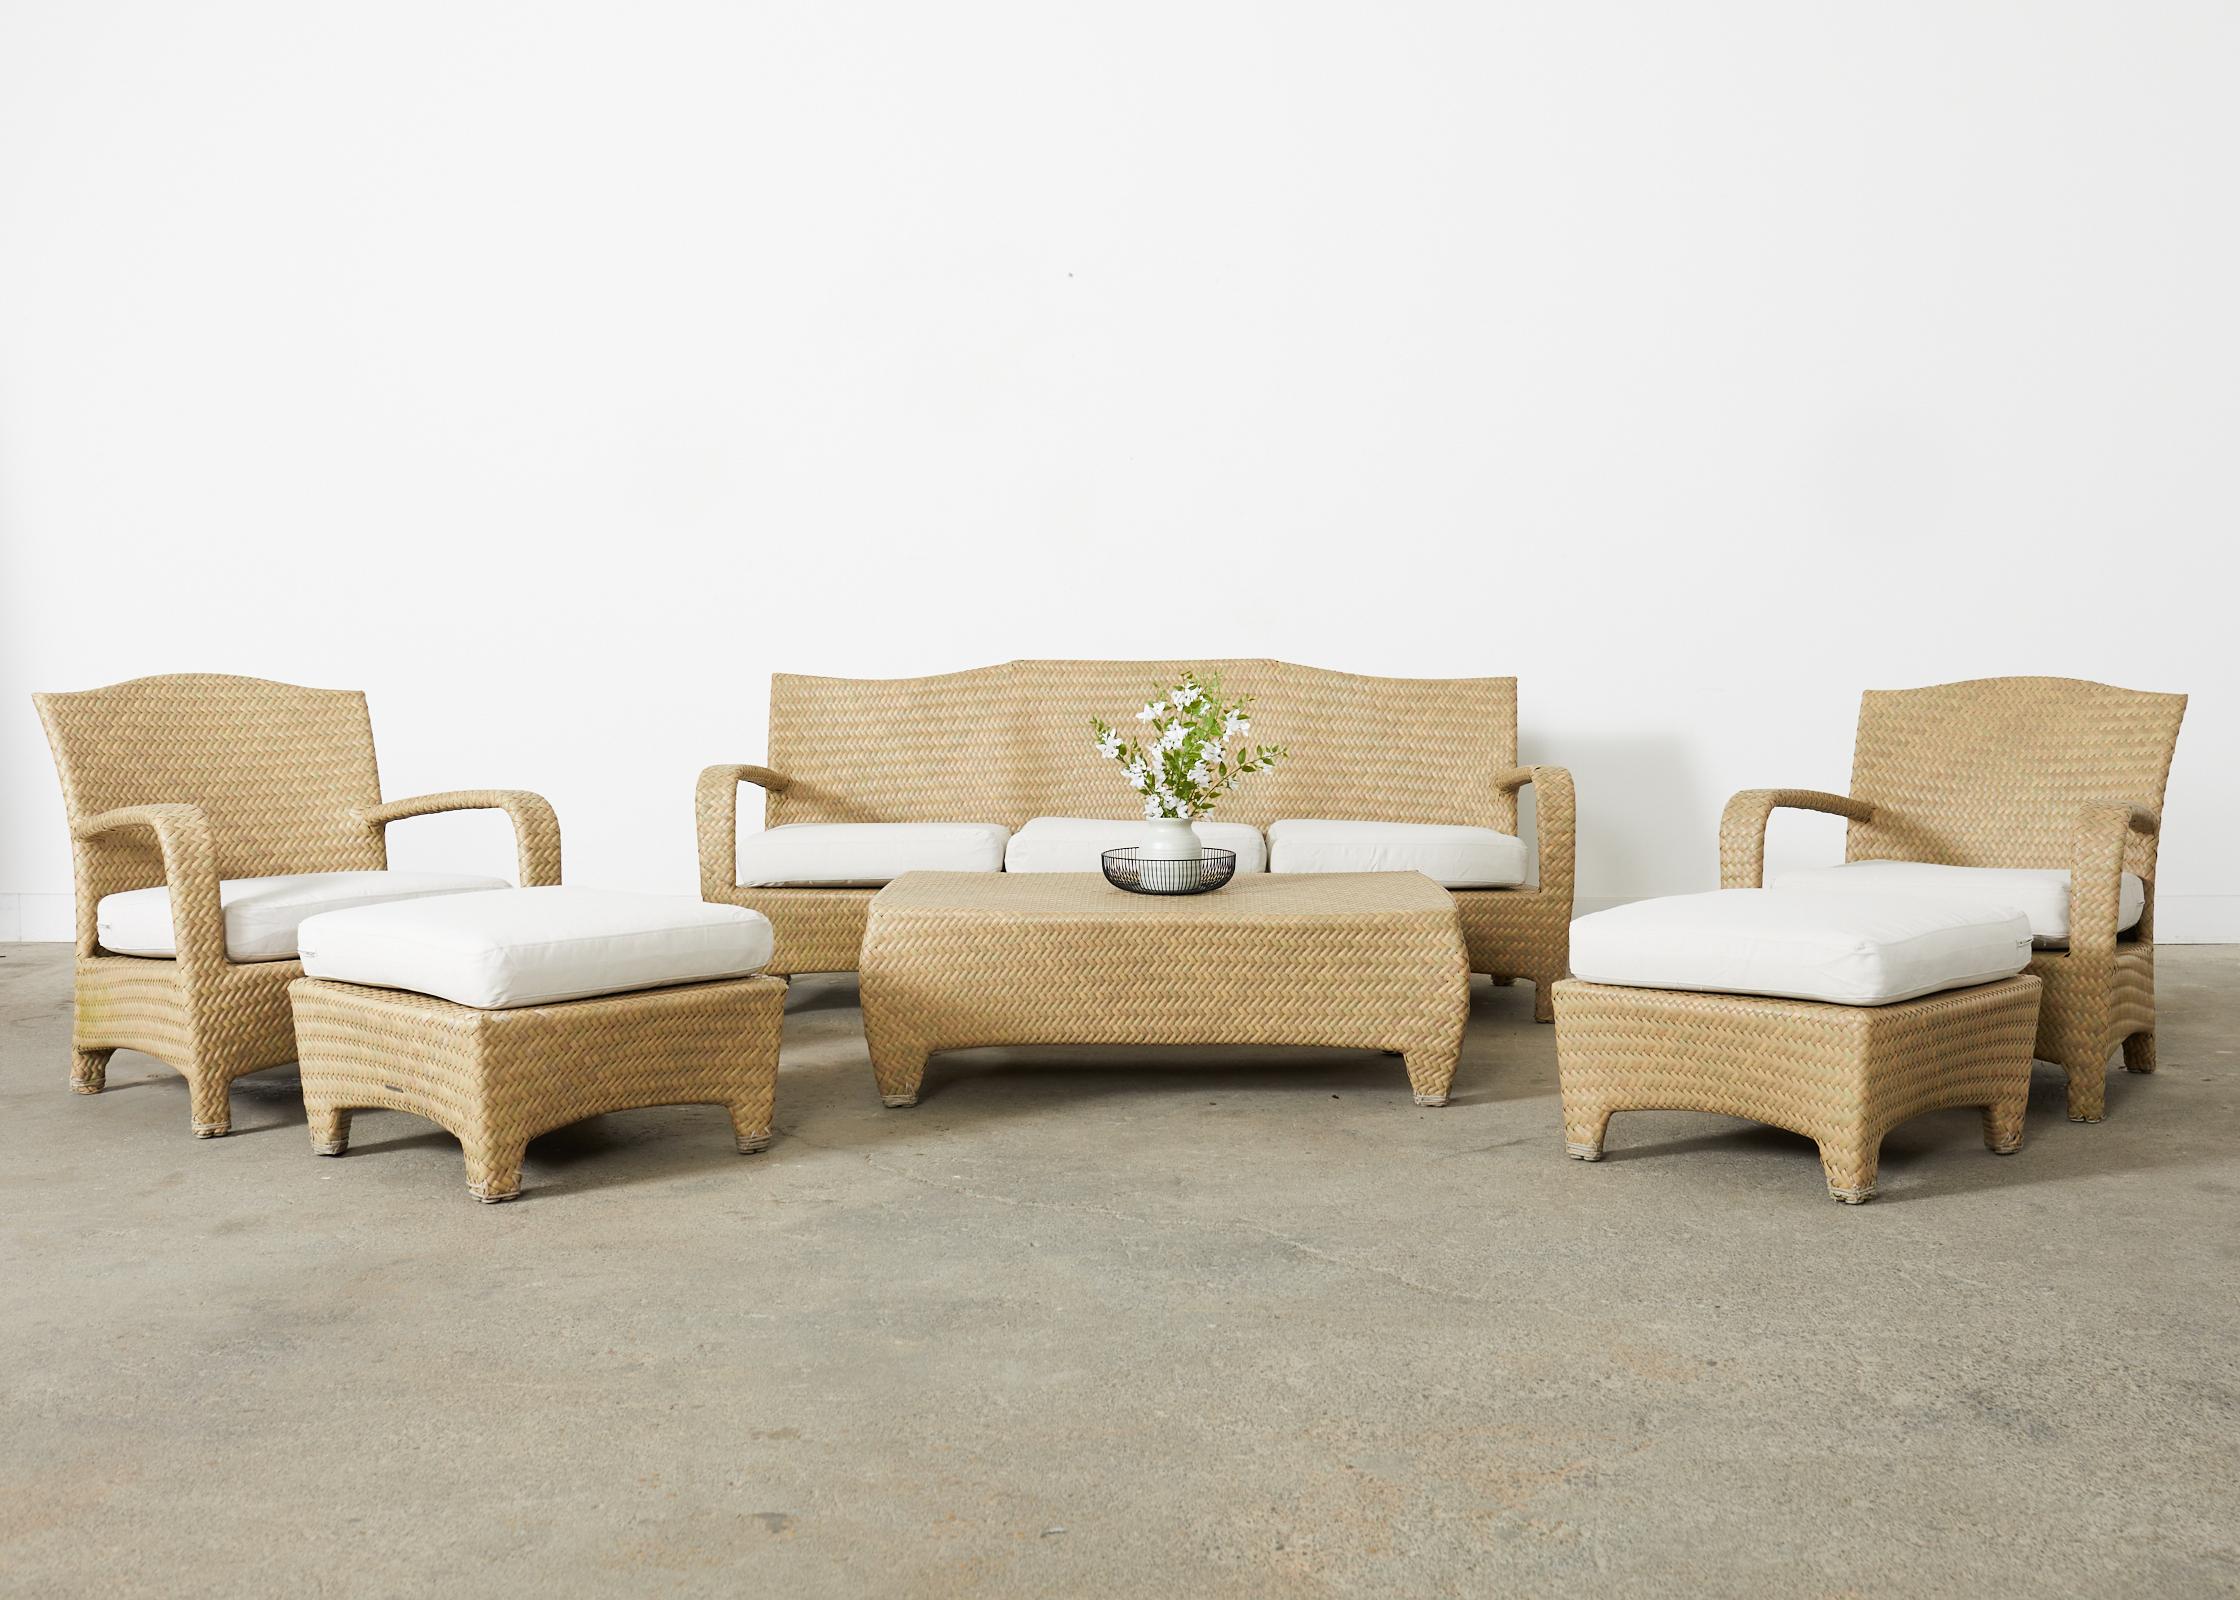 Rare Brown Jordan patio and garden sofa from the Havana collection by Brown Jordan. The sofa features an aluminum frame wrapped with woven resin wicker in stylish earth toned shades. The sofa has a peaked back crest with wide flat arms on each side.